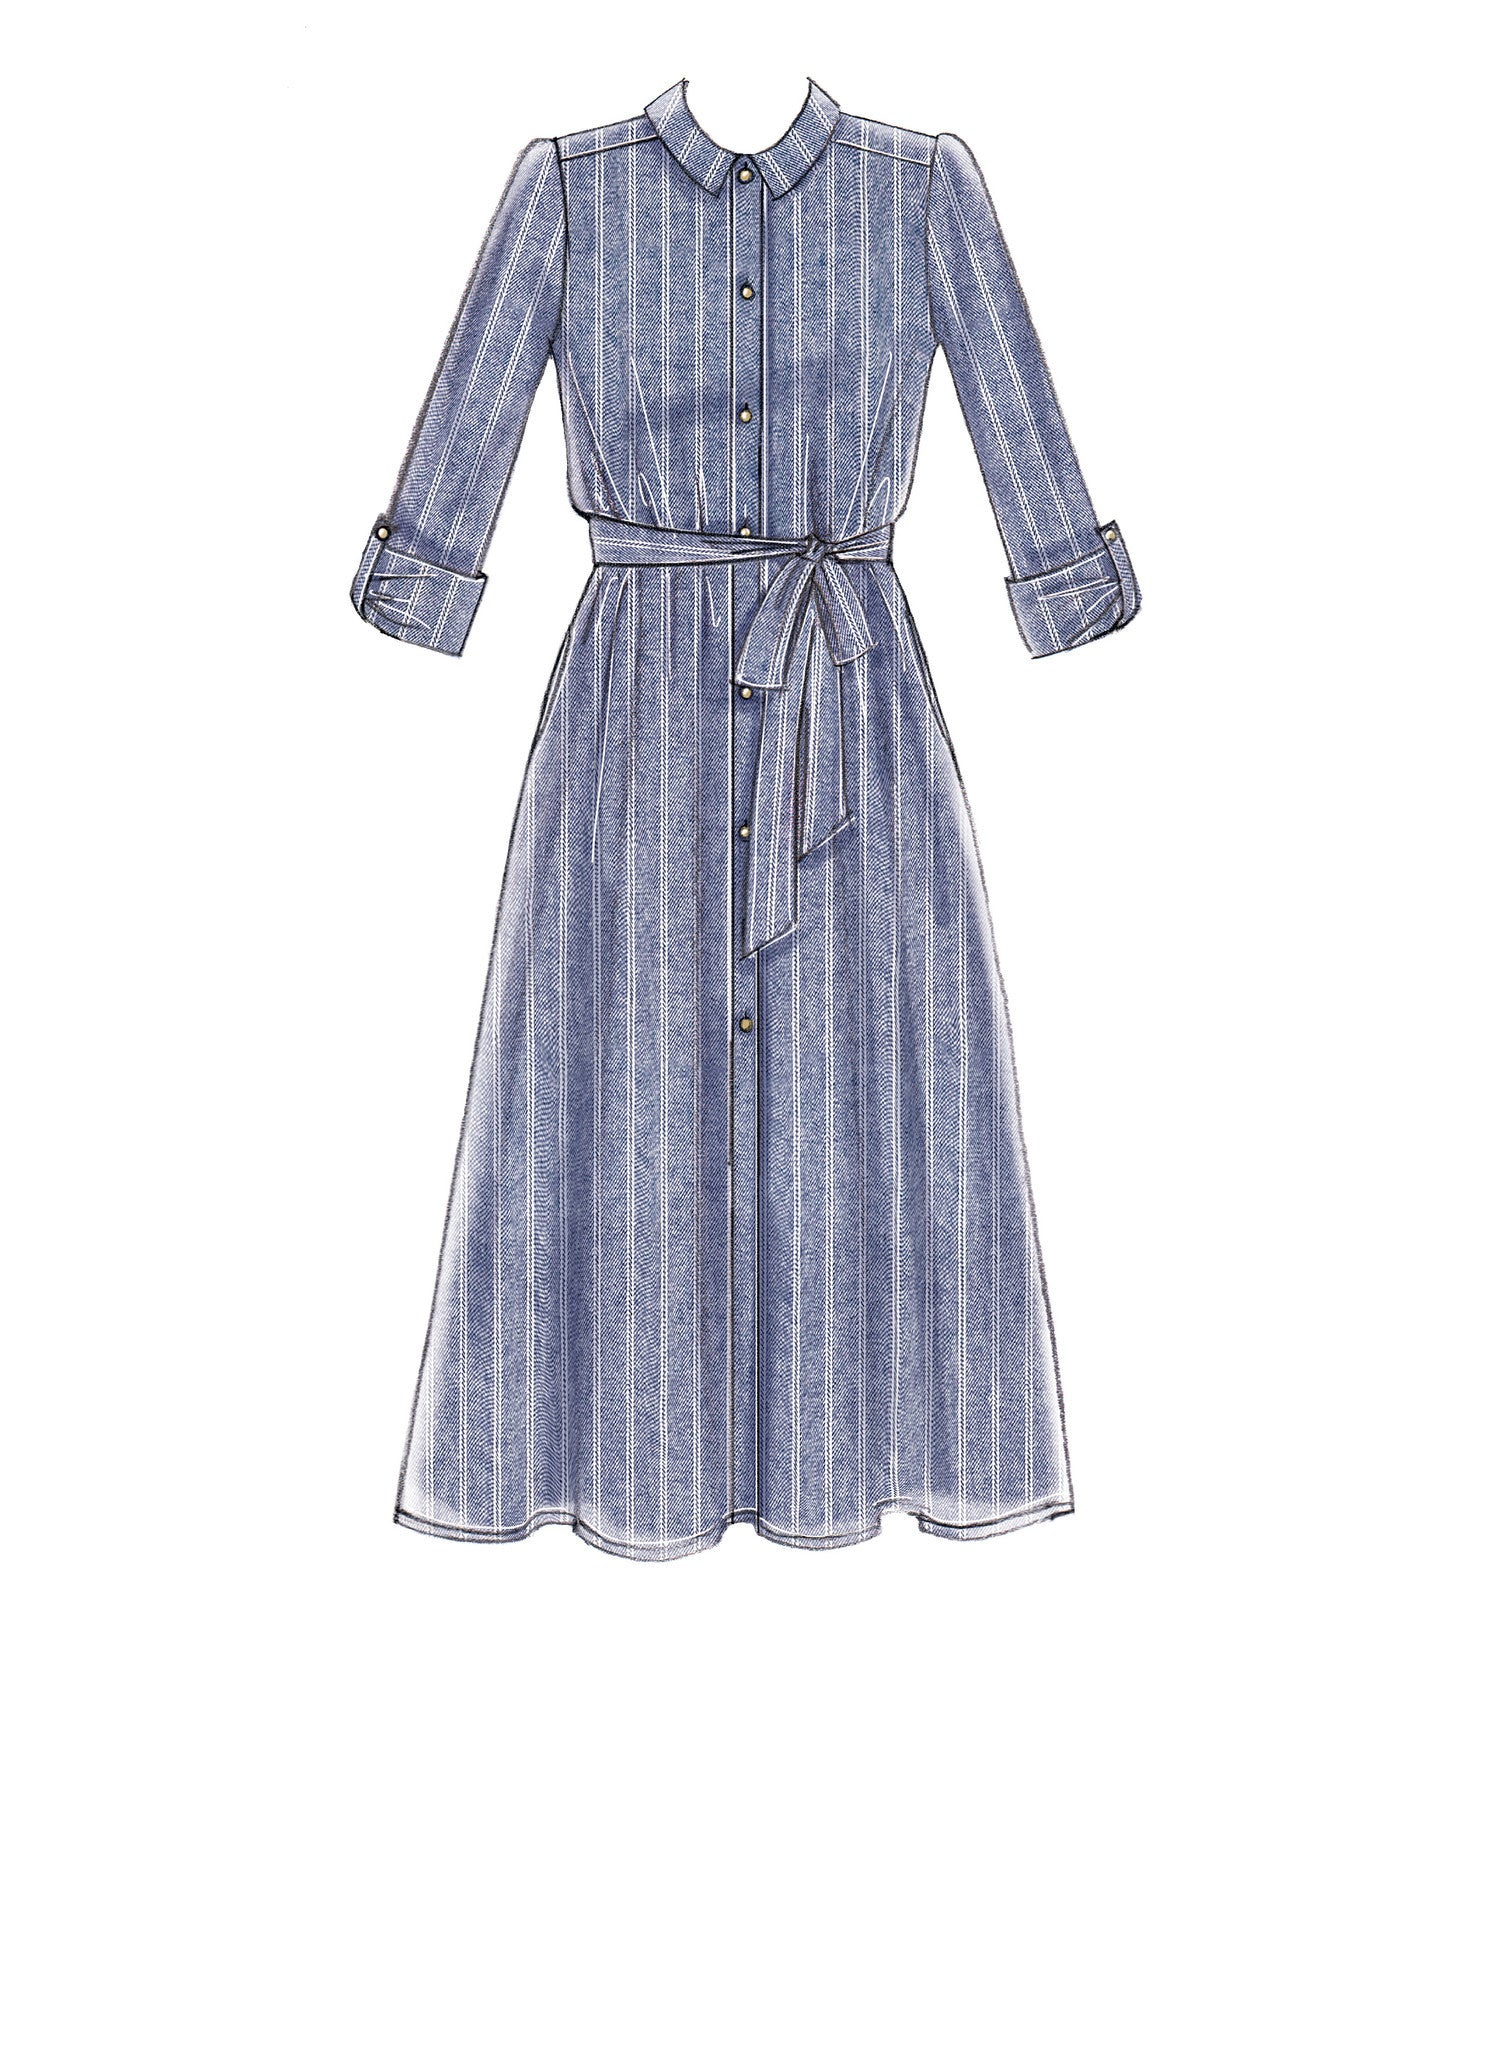 M7565 Misses' Shirtdresses with Sleeve Options, and Belt from Jaycotts Sewing Supplies